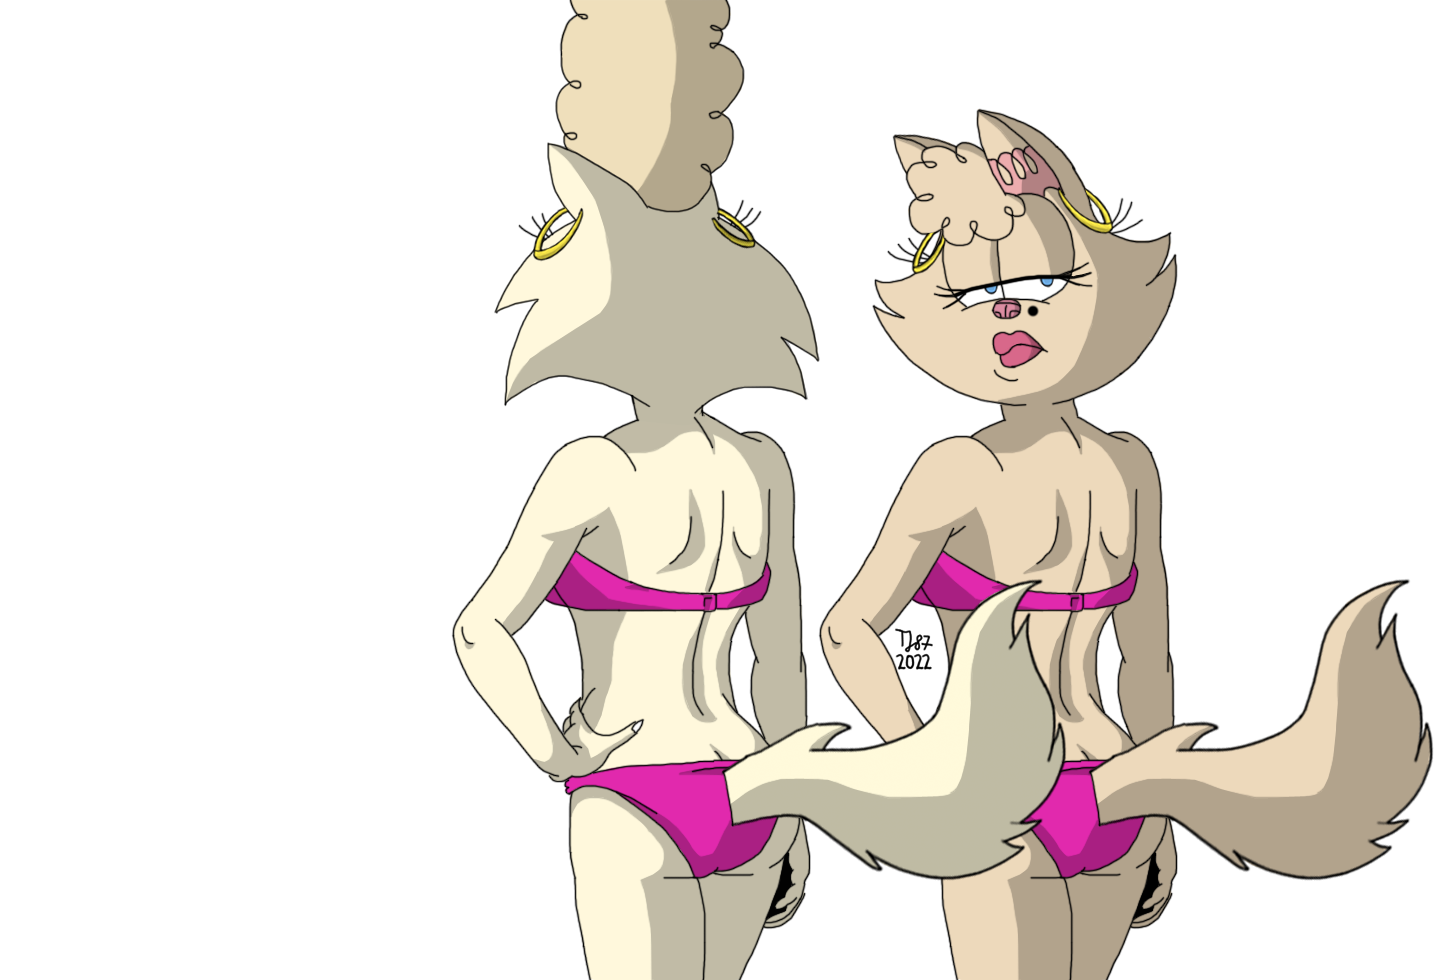 Summer Pussycats 2022 (WIP color test) by TeeJay87